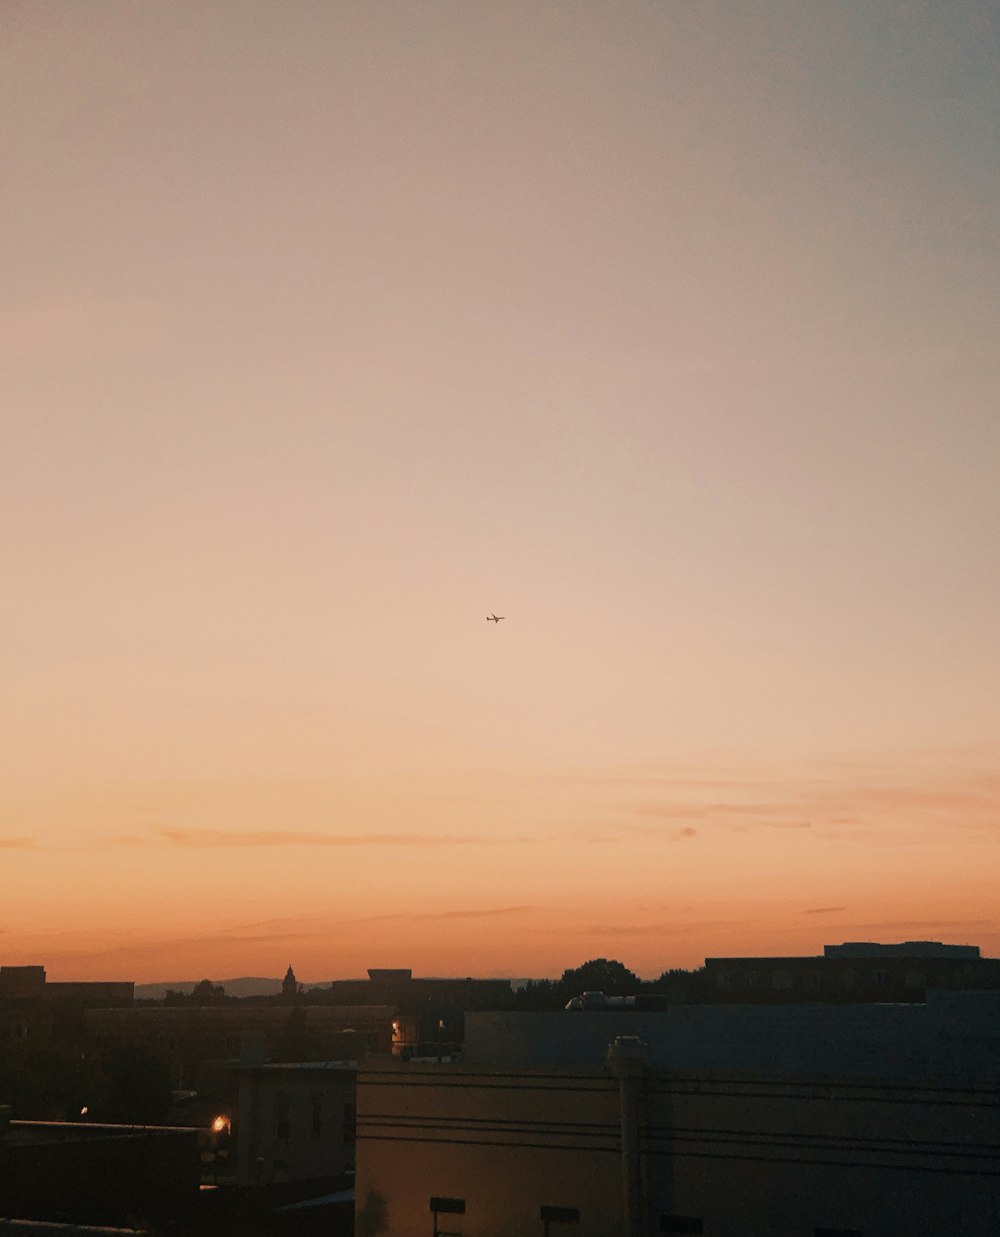 a plane flying over a city at sunset